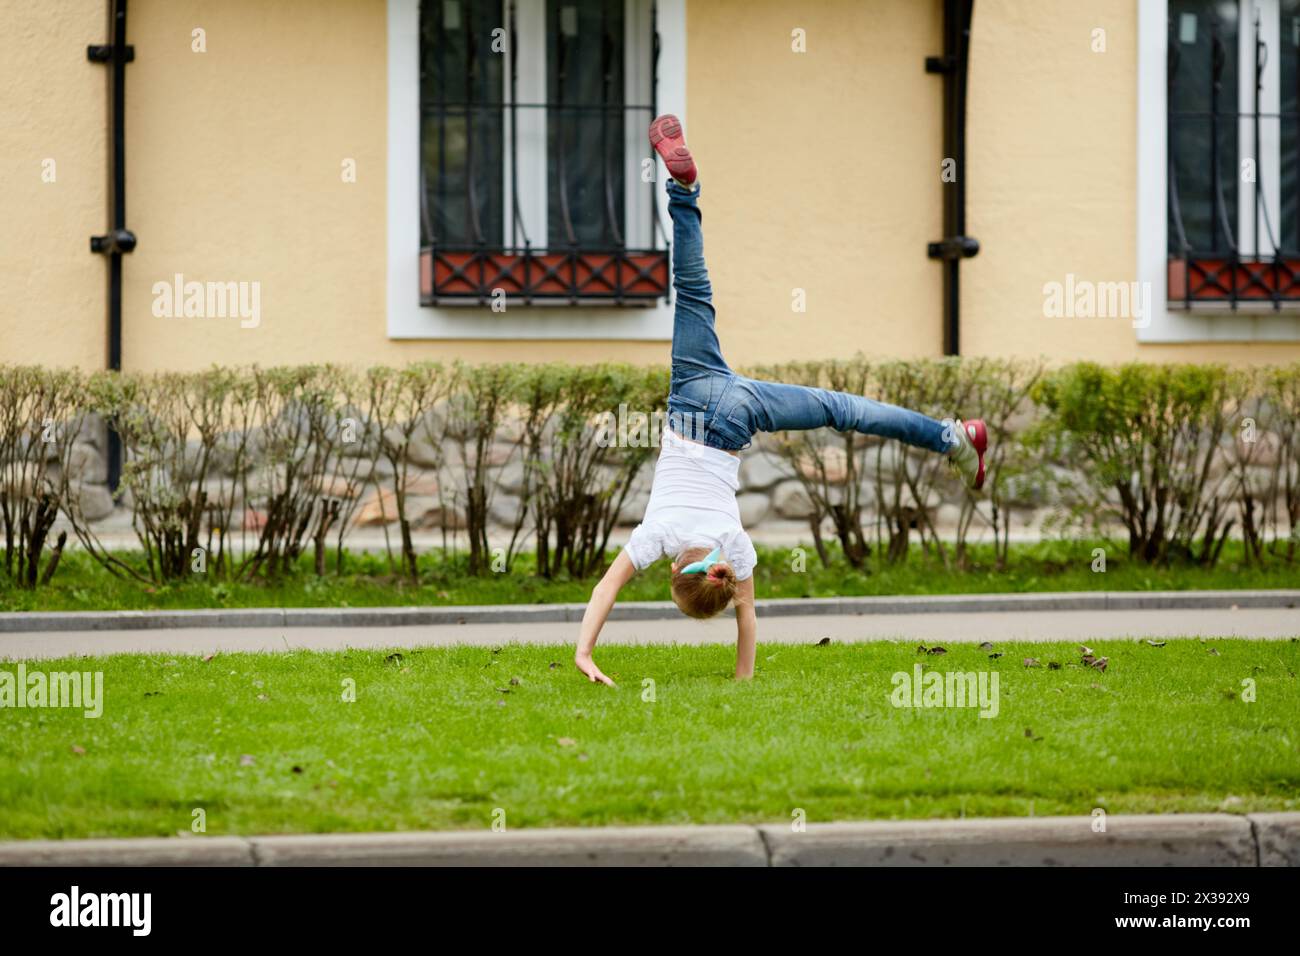 Girl turns cartwheel on grassy lawn in front of house. Stock Photo